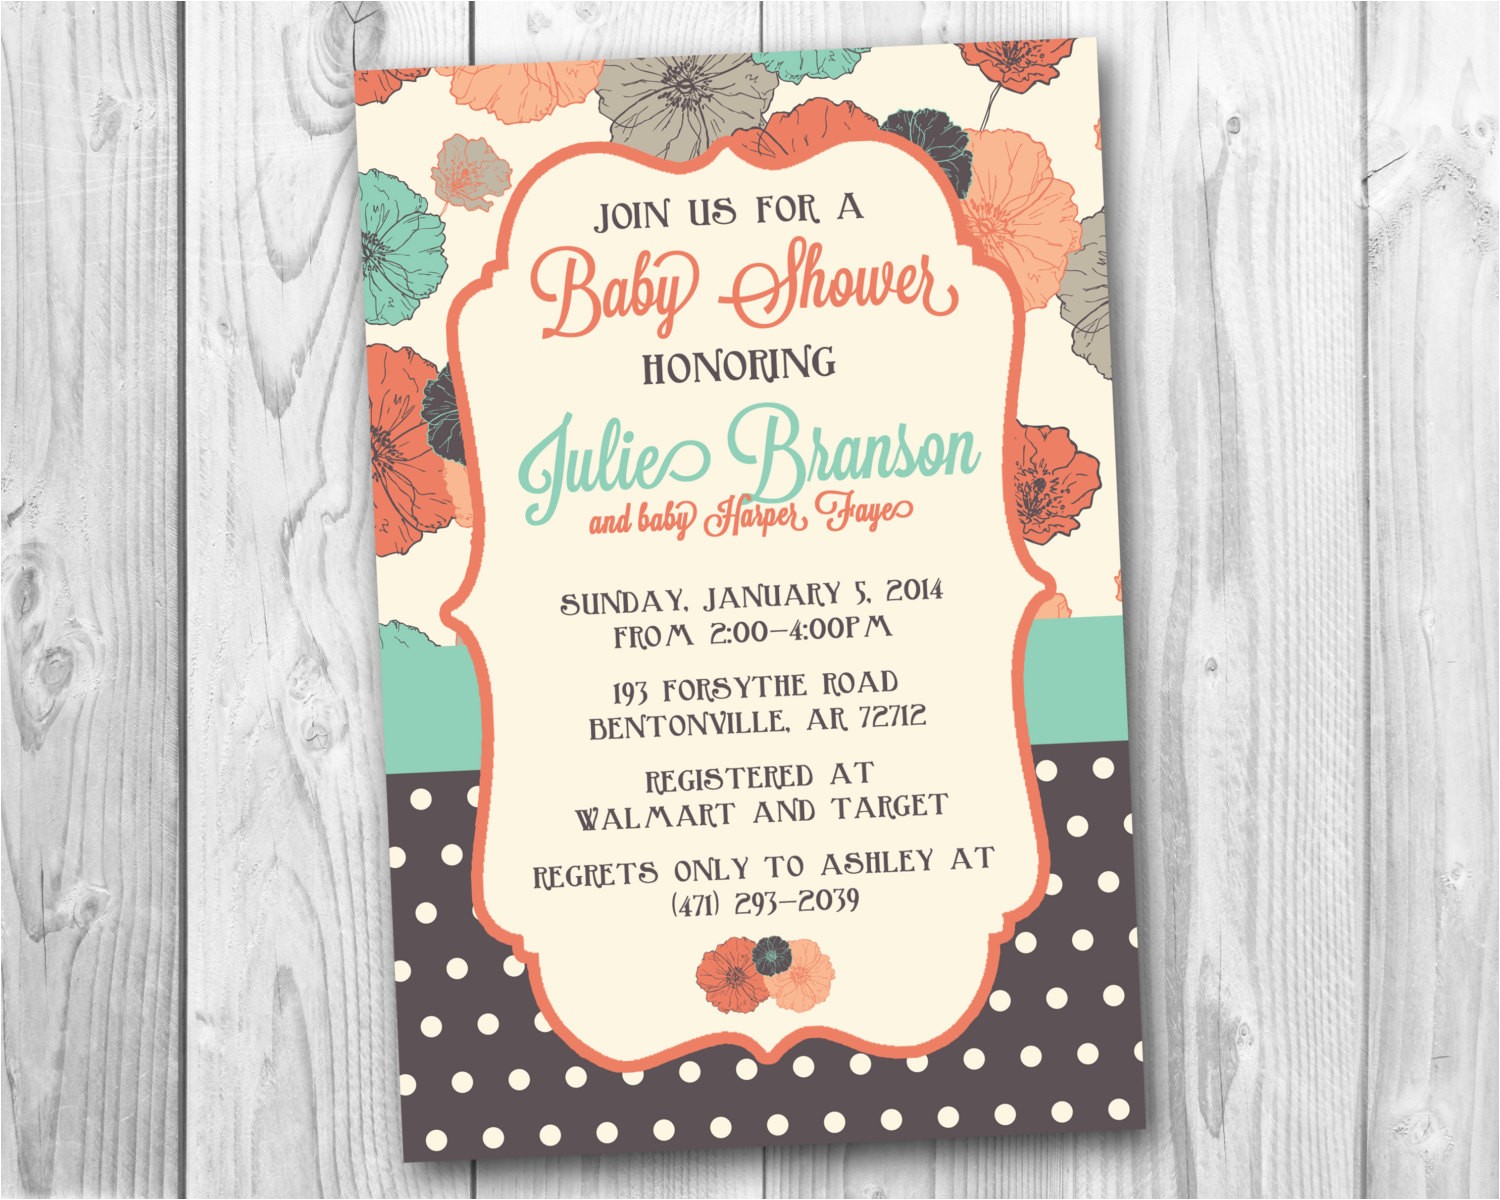 Coral and Teal Baby Shower Invitations Coral and Teal Poppies Baby Shower Invitation by